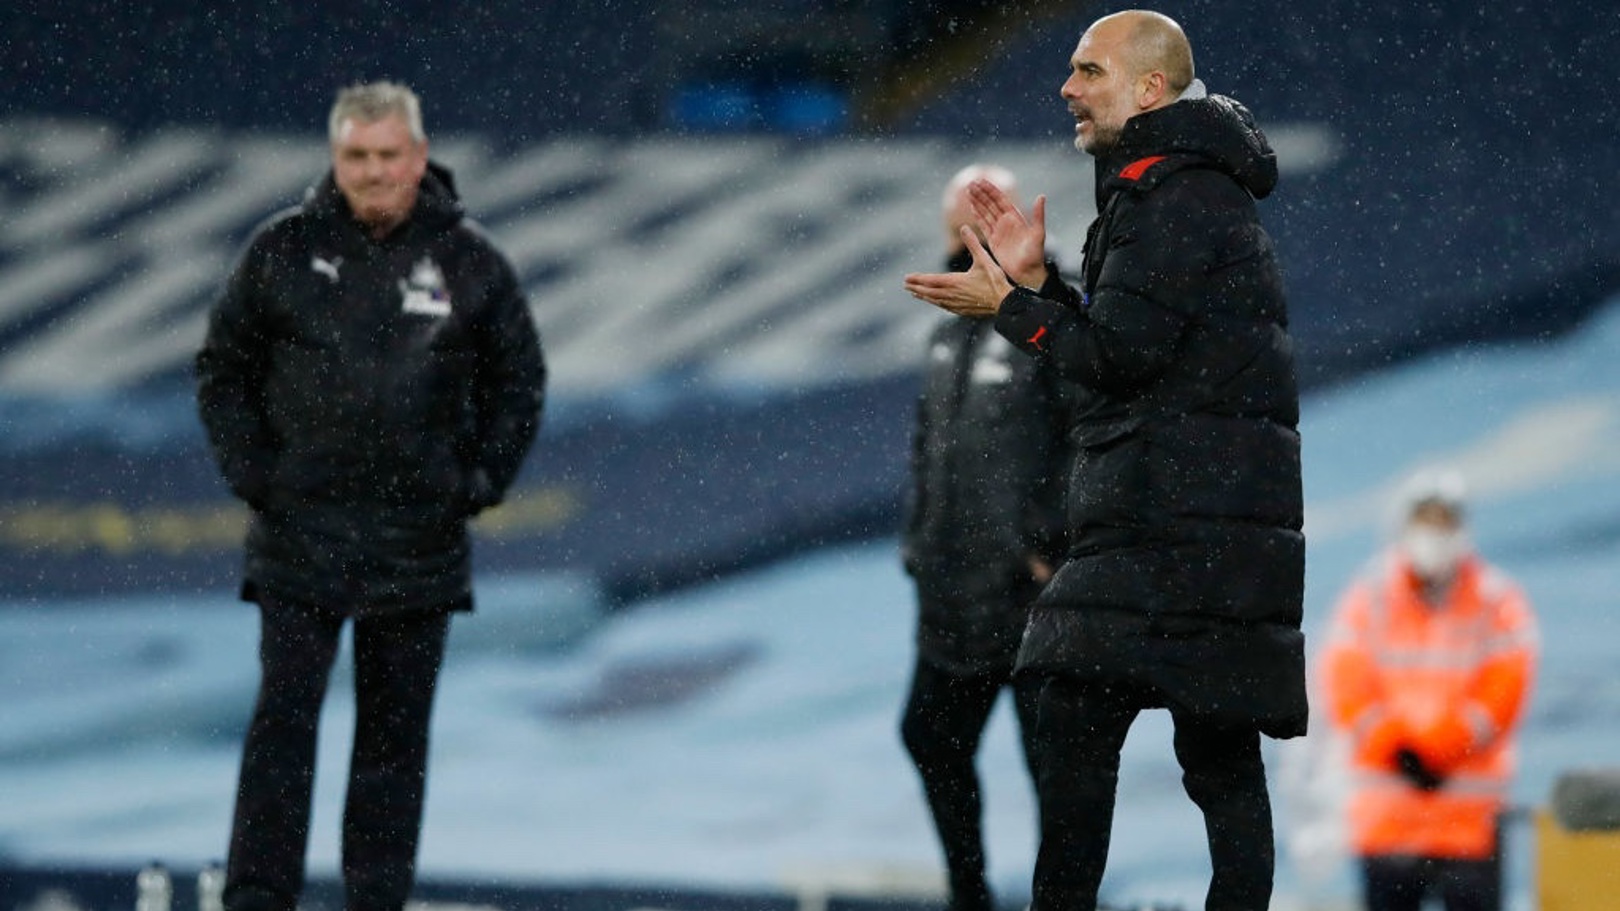 OVER AND OUT: Three points for City - the perfect Christmas gift!